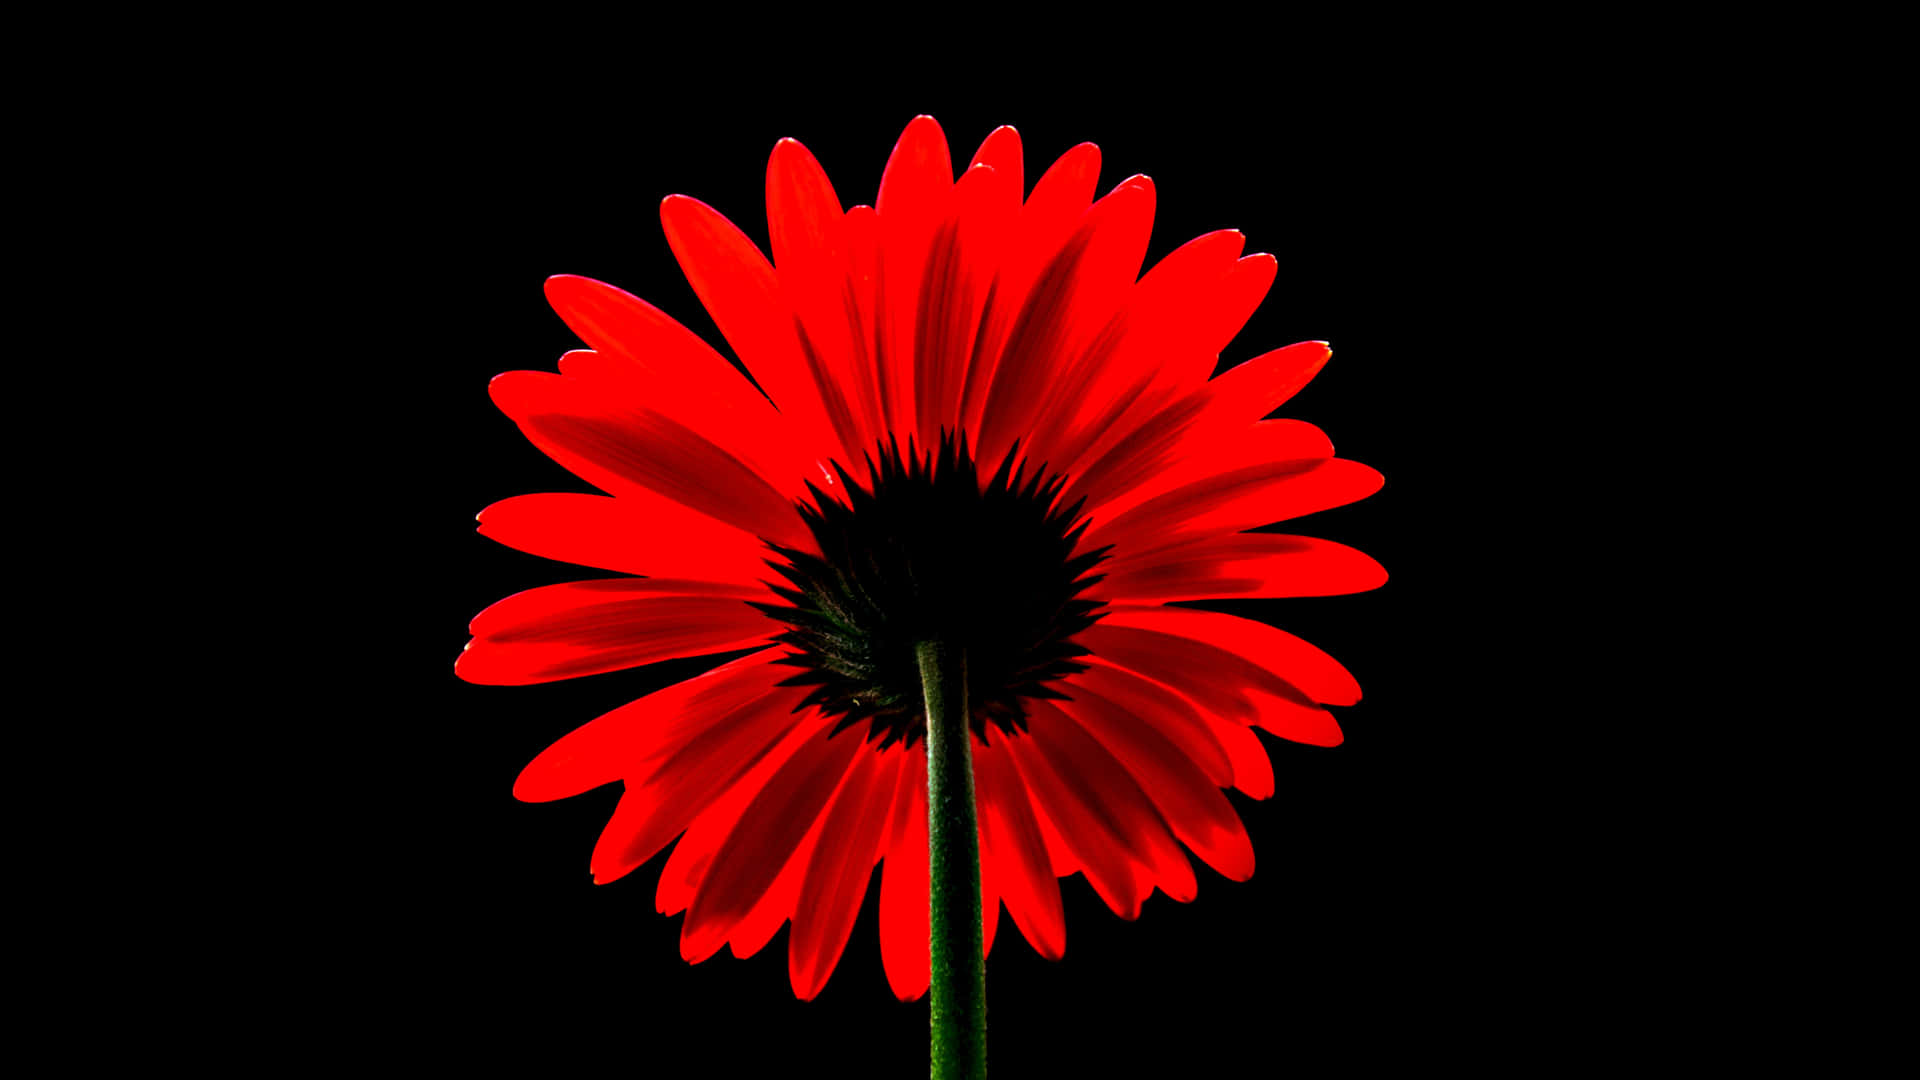 A Red Flower On A Black Background